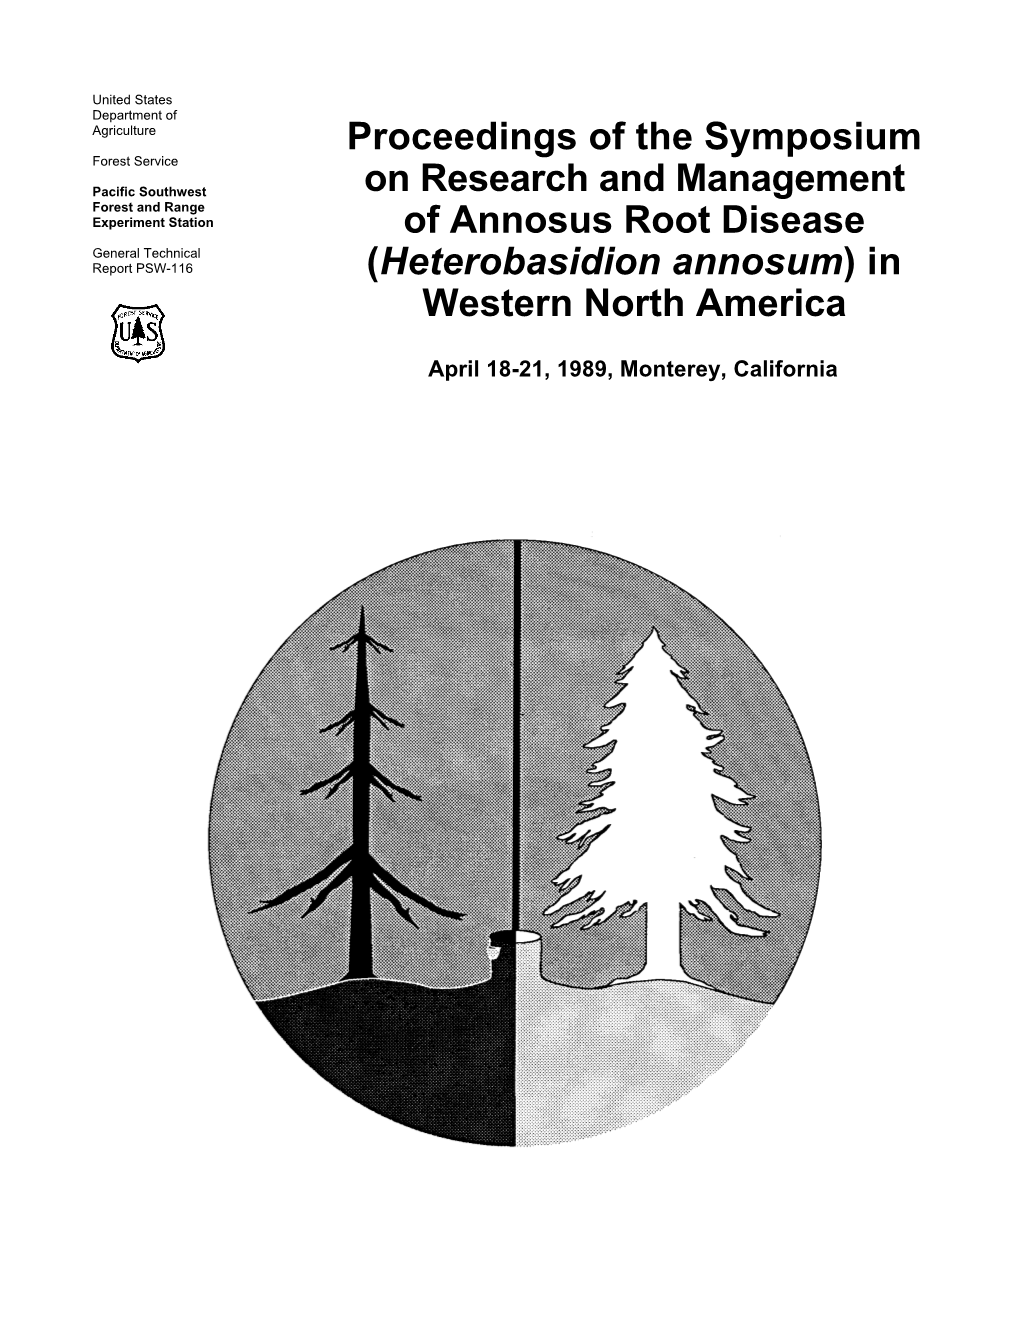 Proceedings of the Symposium on Research and Management of Annosus Root Disease (Heterobasidion Annosum) in Western North America